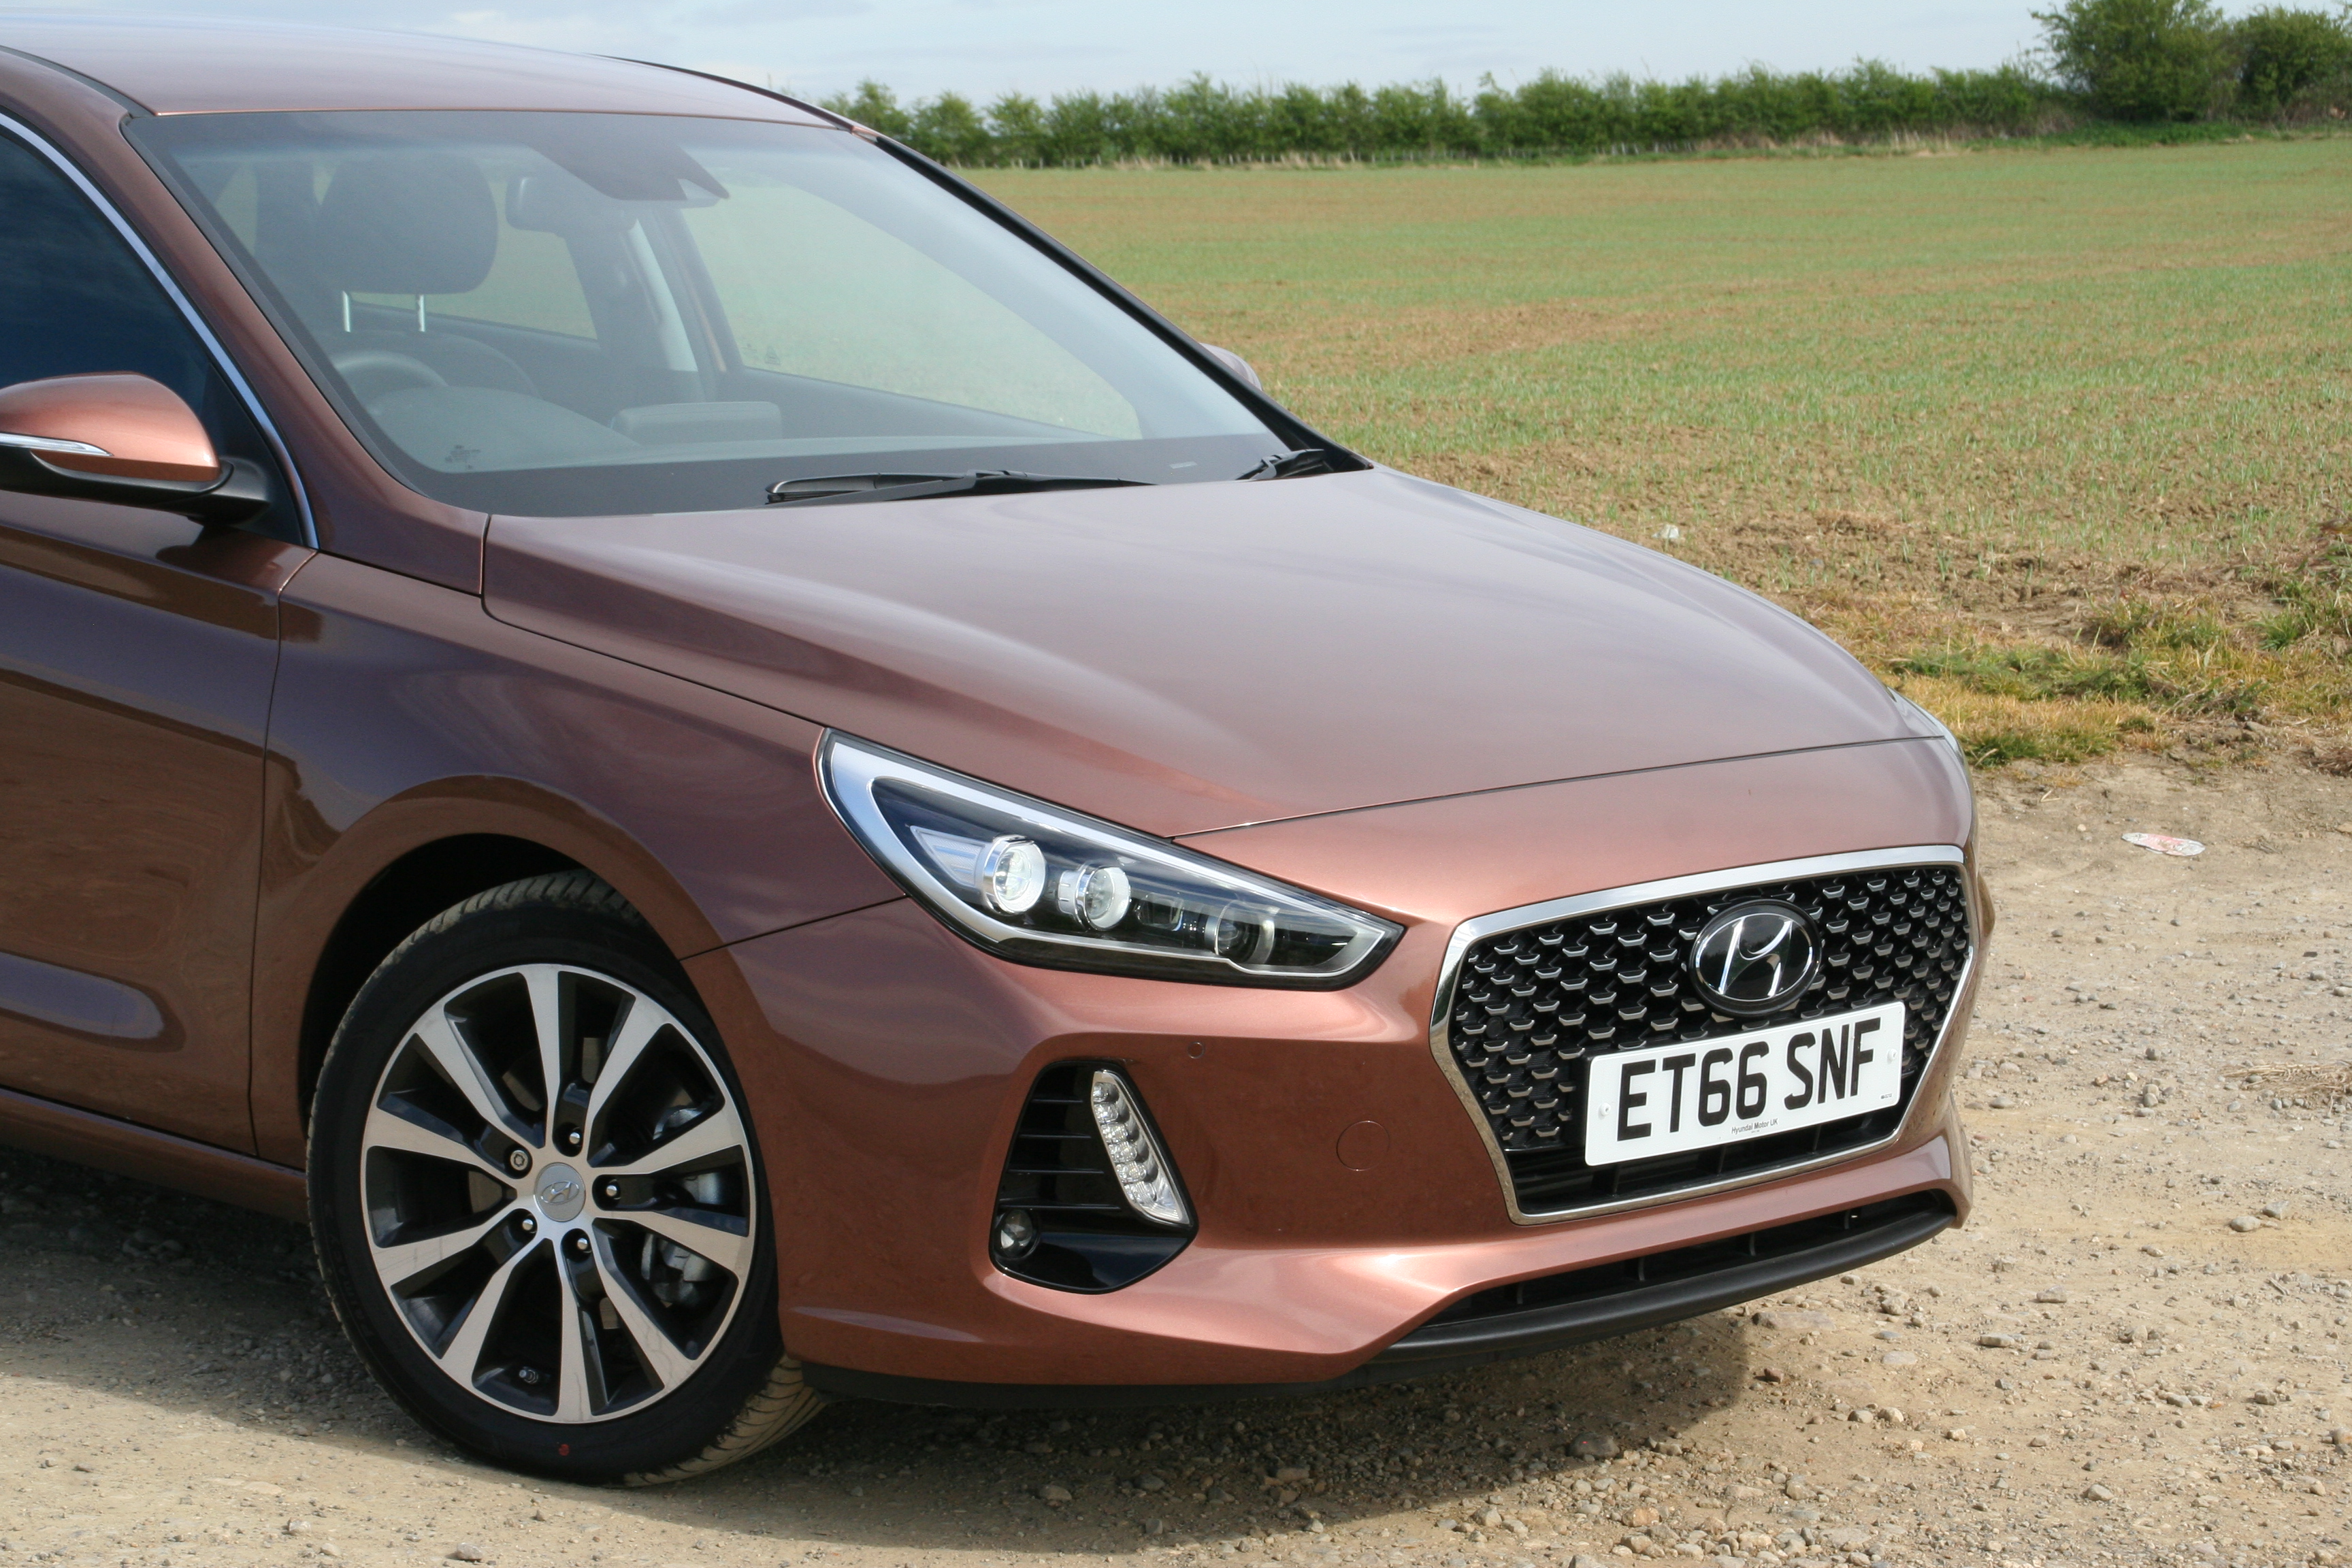 High-flying Hyundai leaps into premium classification with new i30